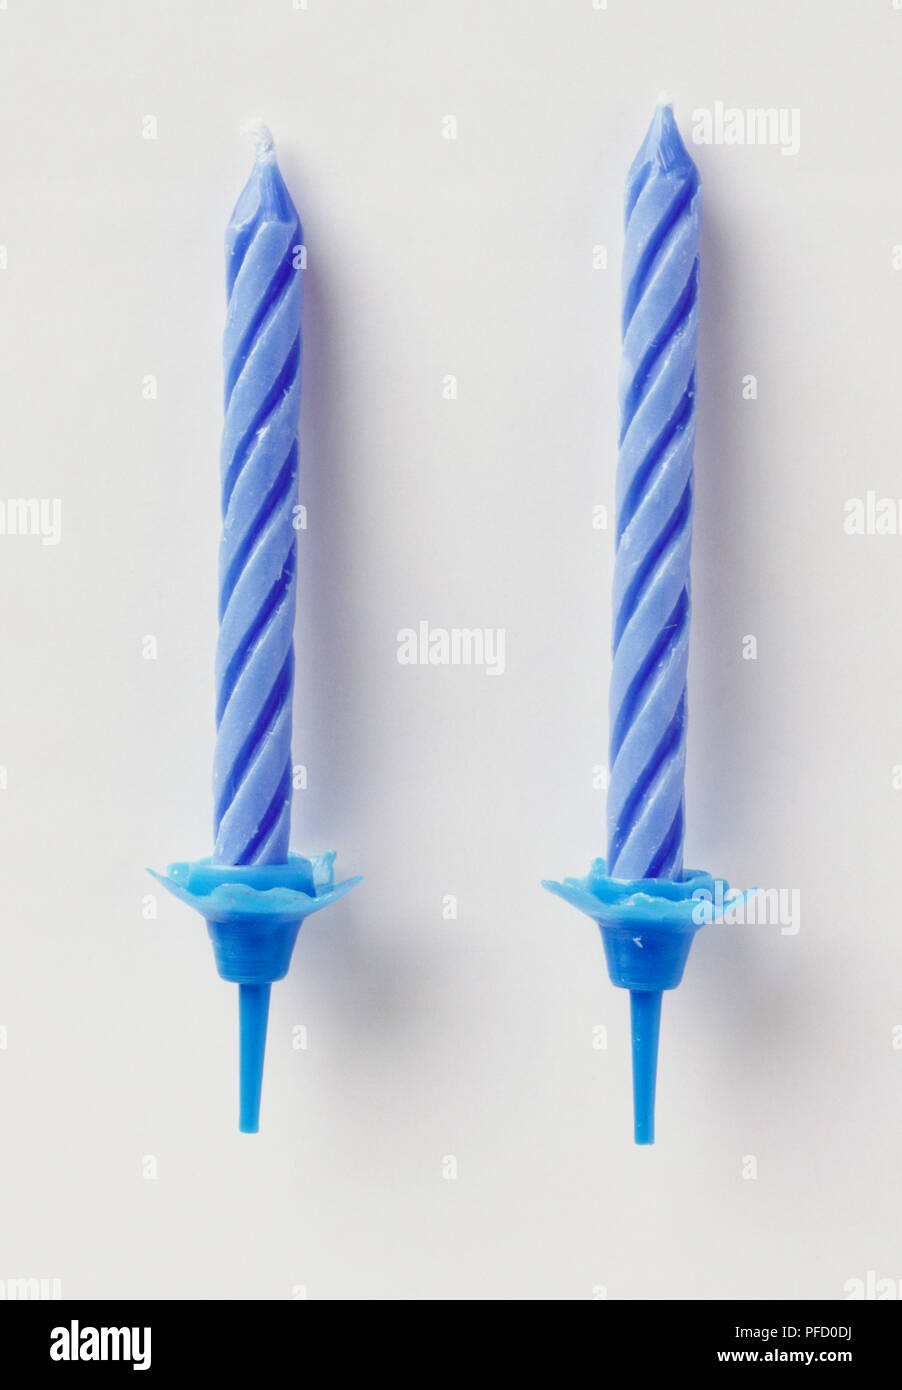 Two blue birthday candles in cake holders, close up. Stock Photo